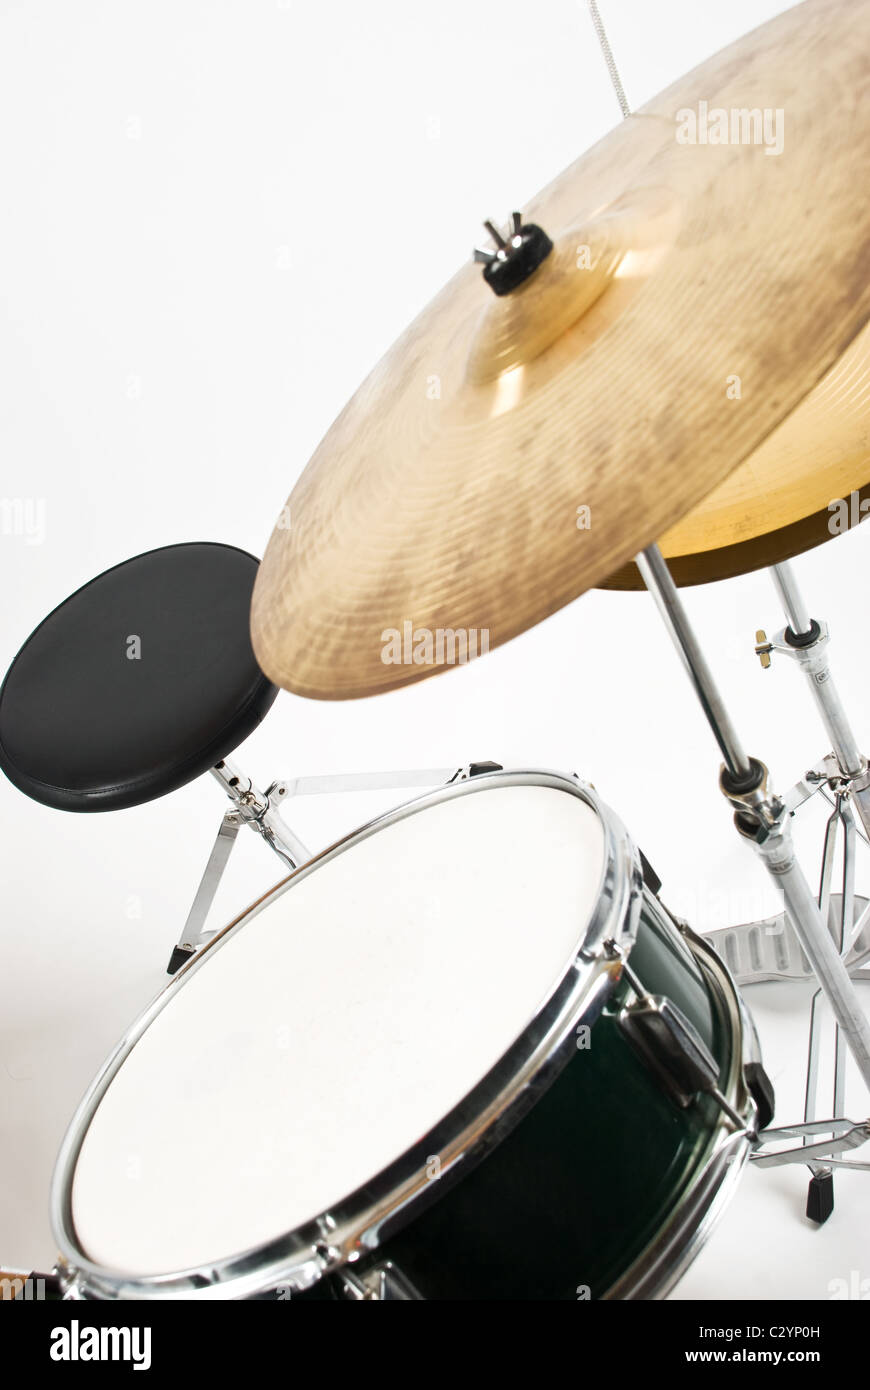 Set with cymbal drum and chair indoor shot Stock Photo